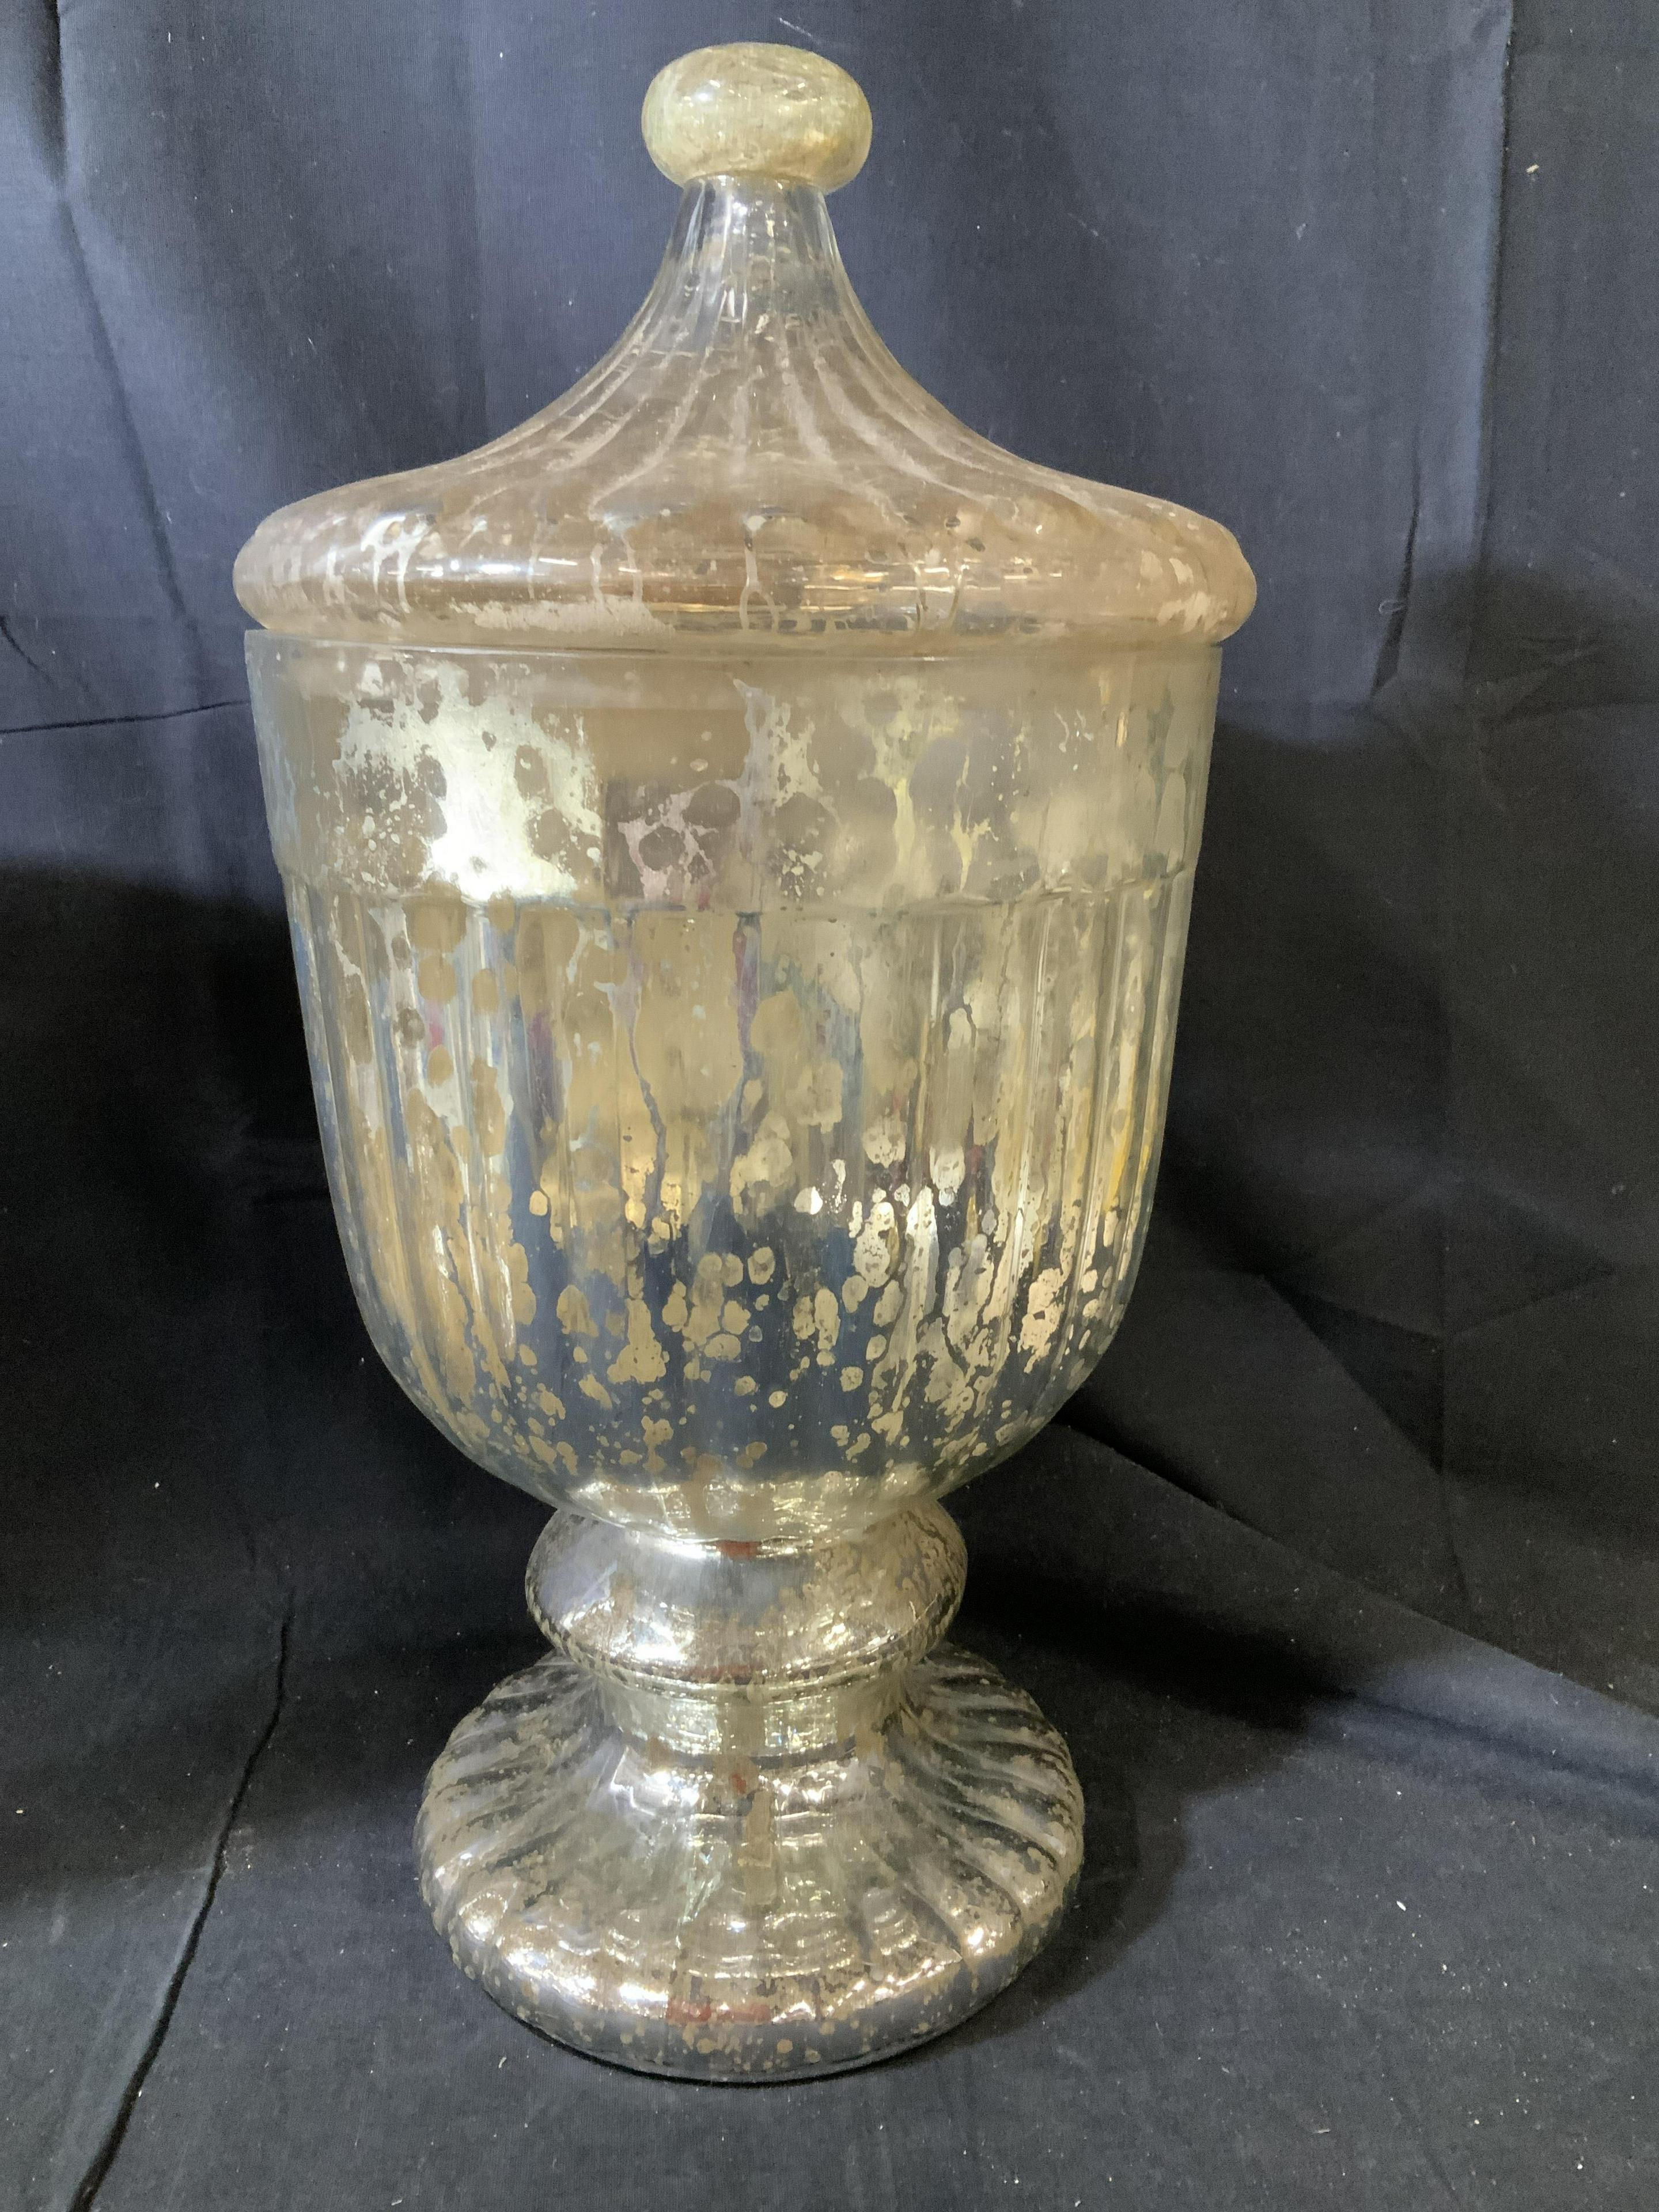 Pair of highly decorative large bolubous form mercury glass jars or lidded urns with lids in the Hollywood Regency style in gold and silver crackle style glass. Each has fluted pedestal base, bulbous centers, fluted lids tapered to ball finials.
   